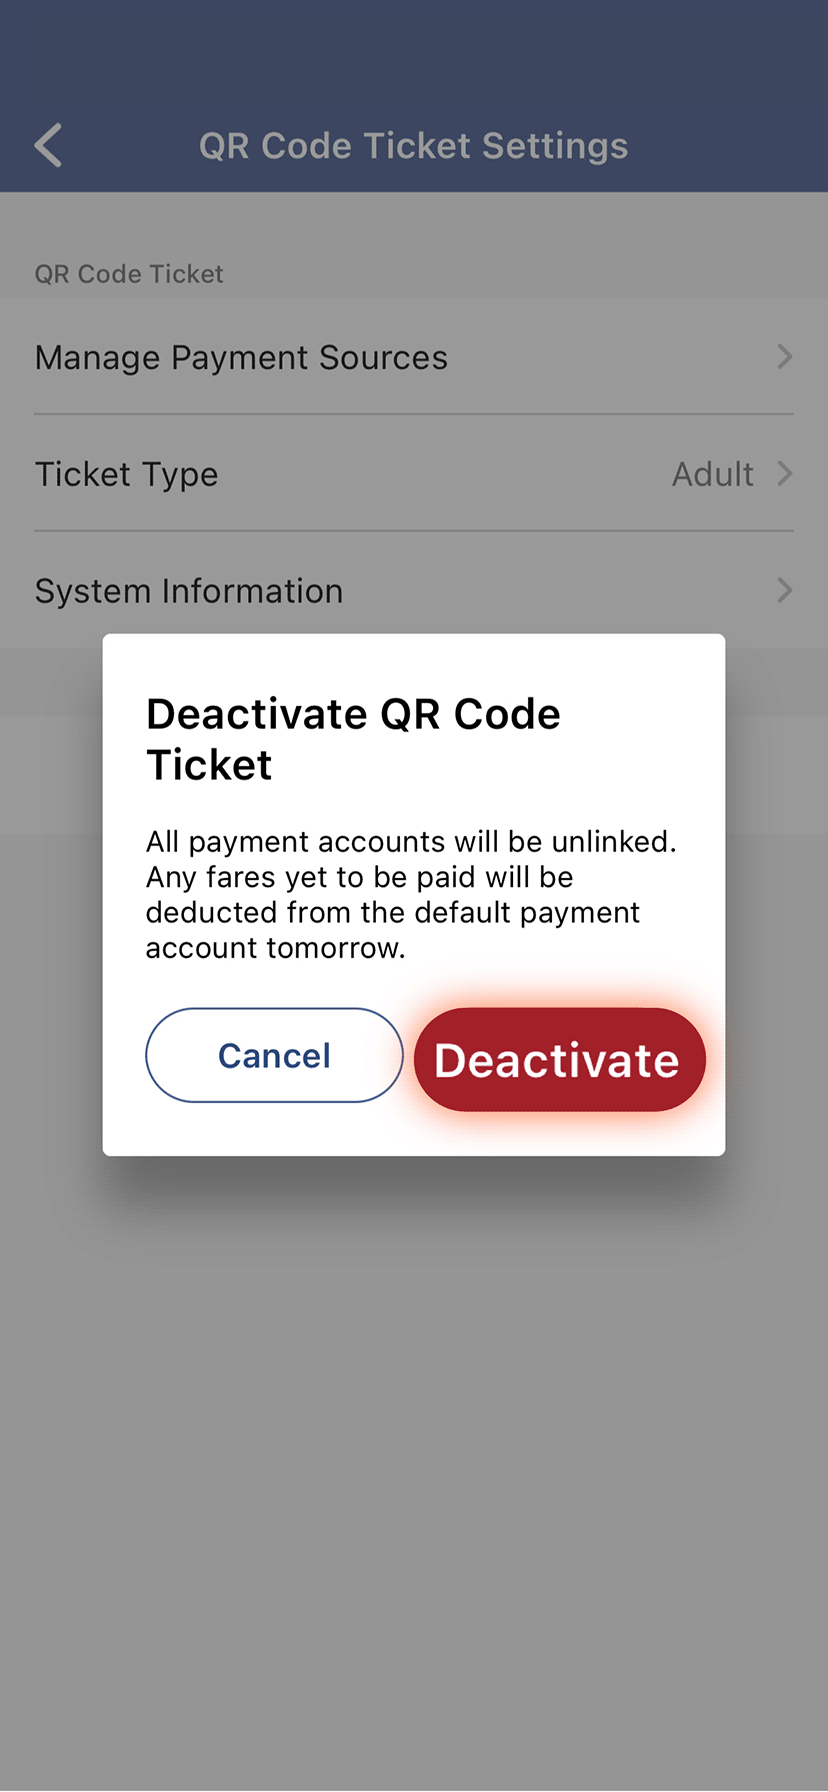 Confirm to deactivate and a confirmation of function suspension will be displayed. The QR code shown here is only for ticket checking by MTR staff. If you wish to reactivate the function, you may re-link on MTR Mobile the next day after unpaid fares are deducted from the default payment account.